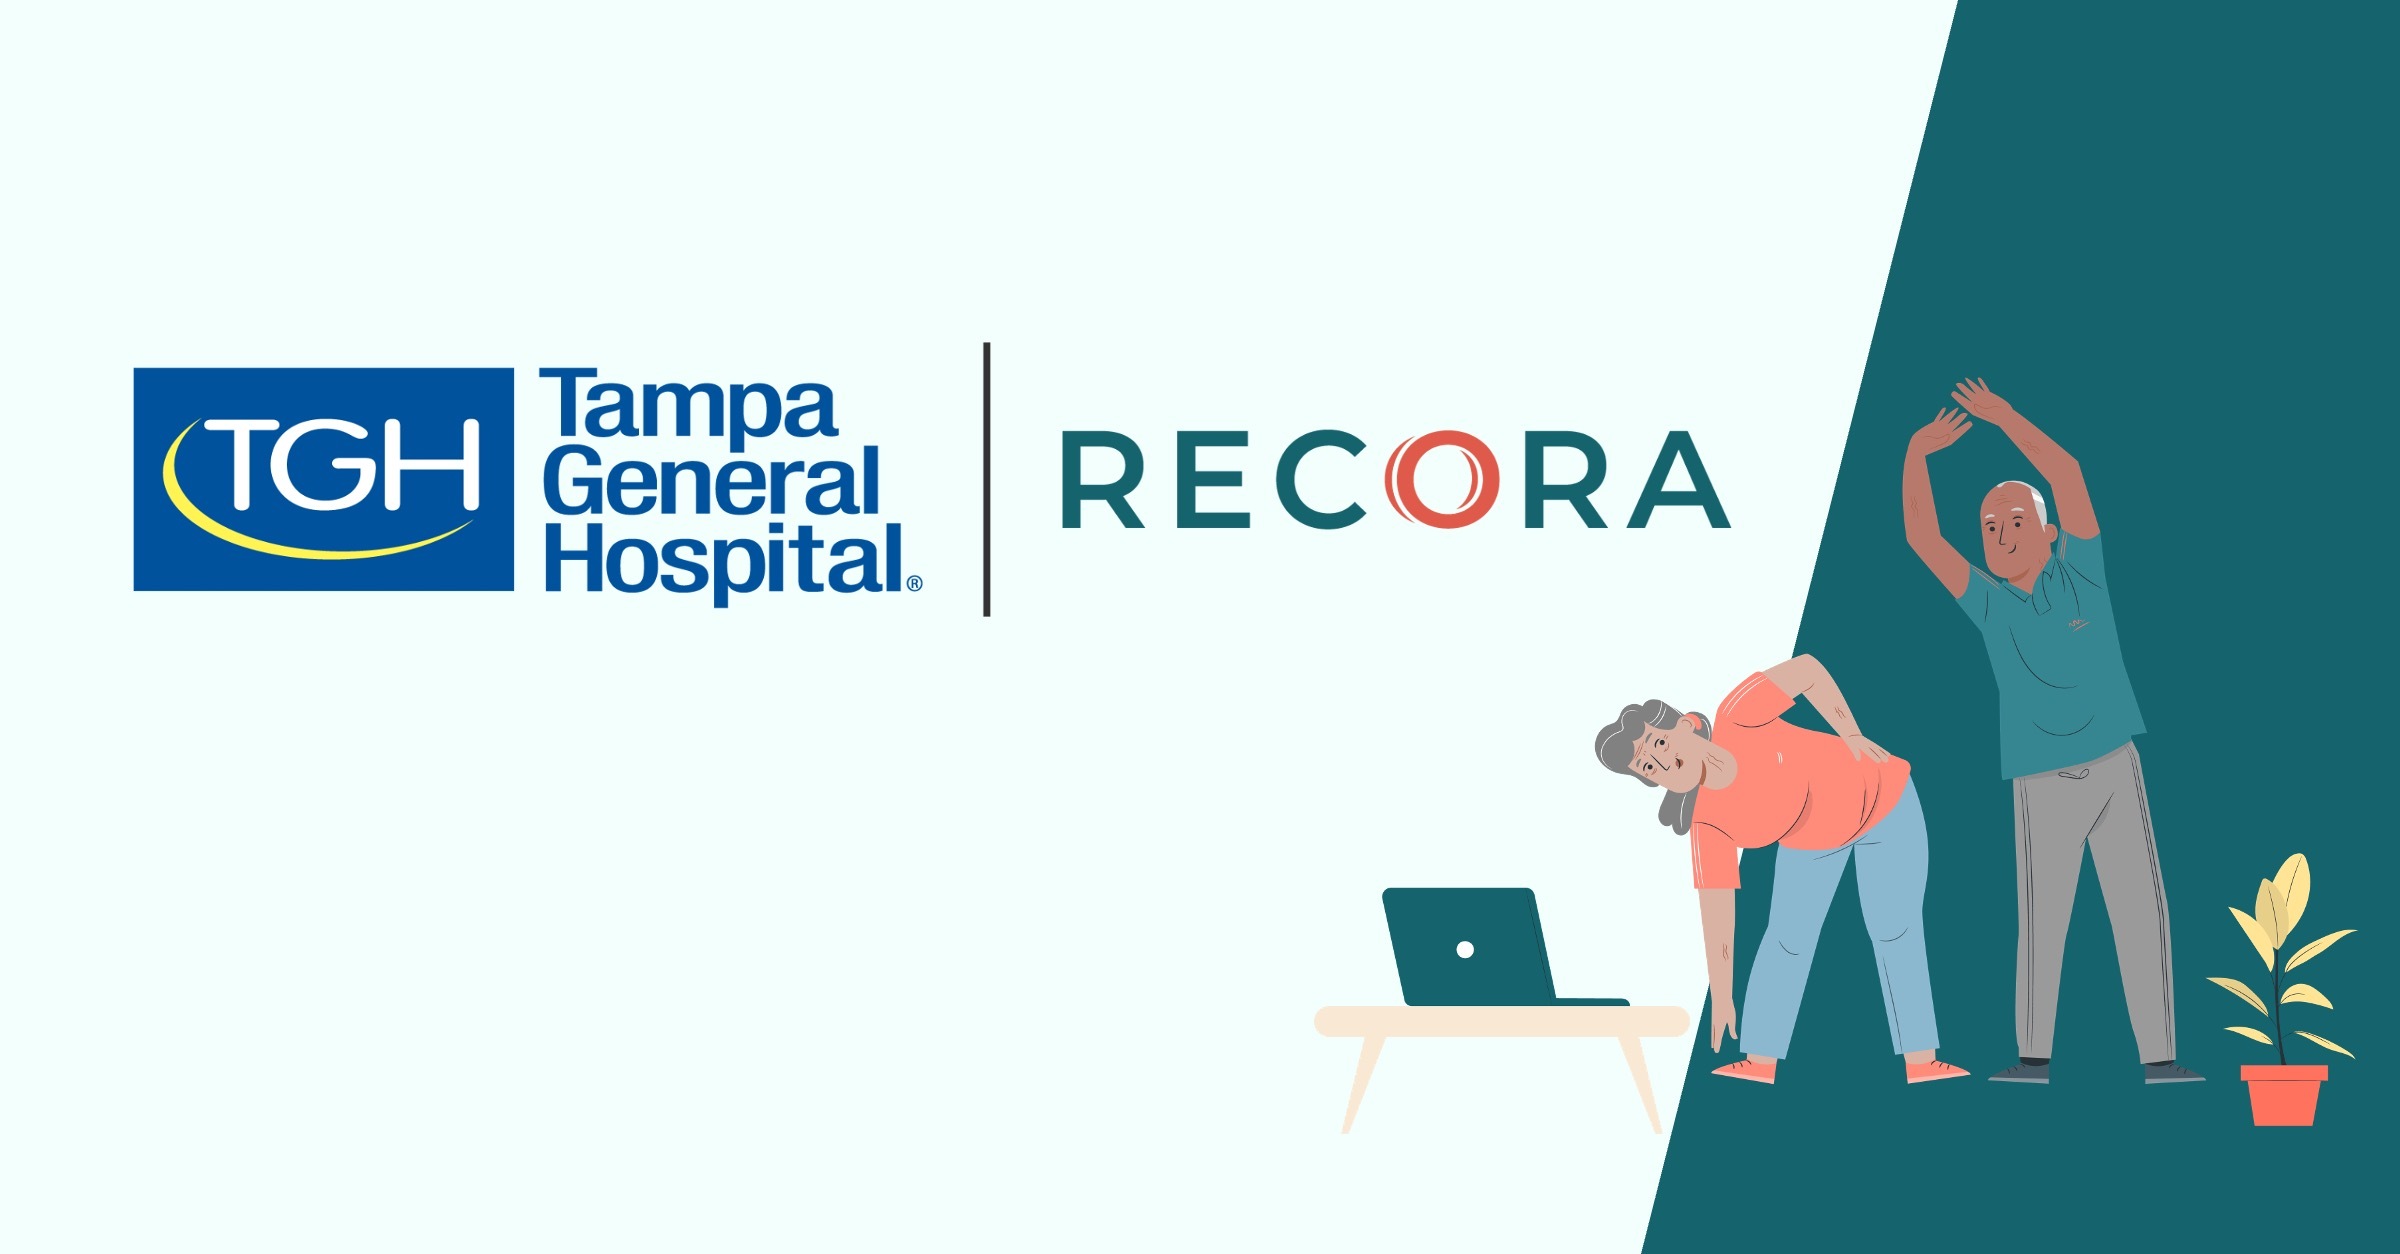 Tampa General Hospital and Recora